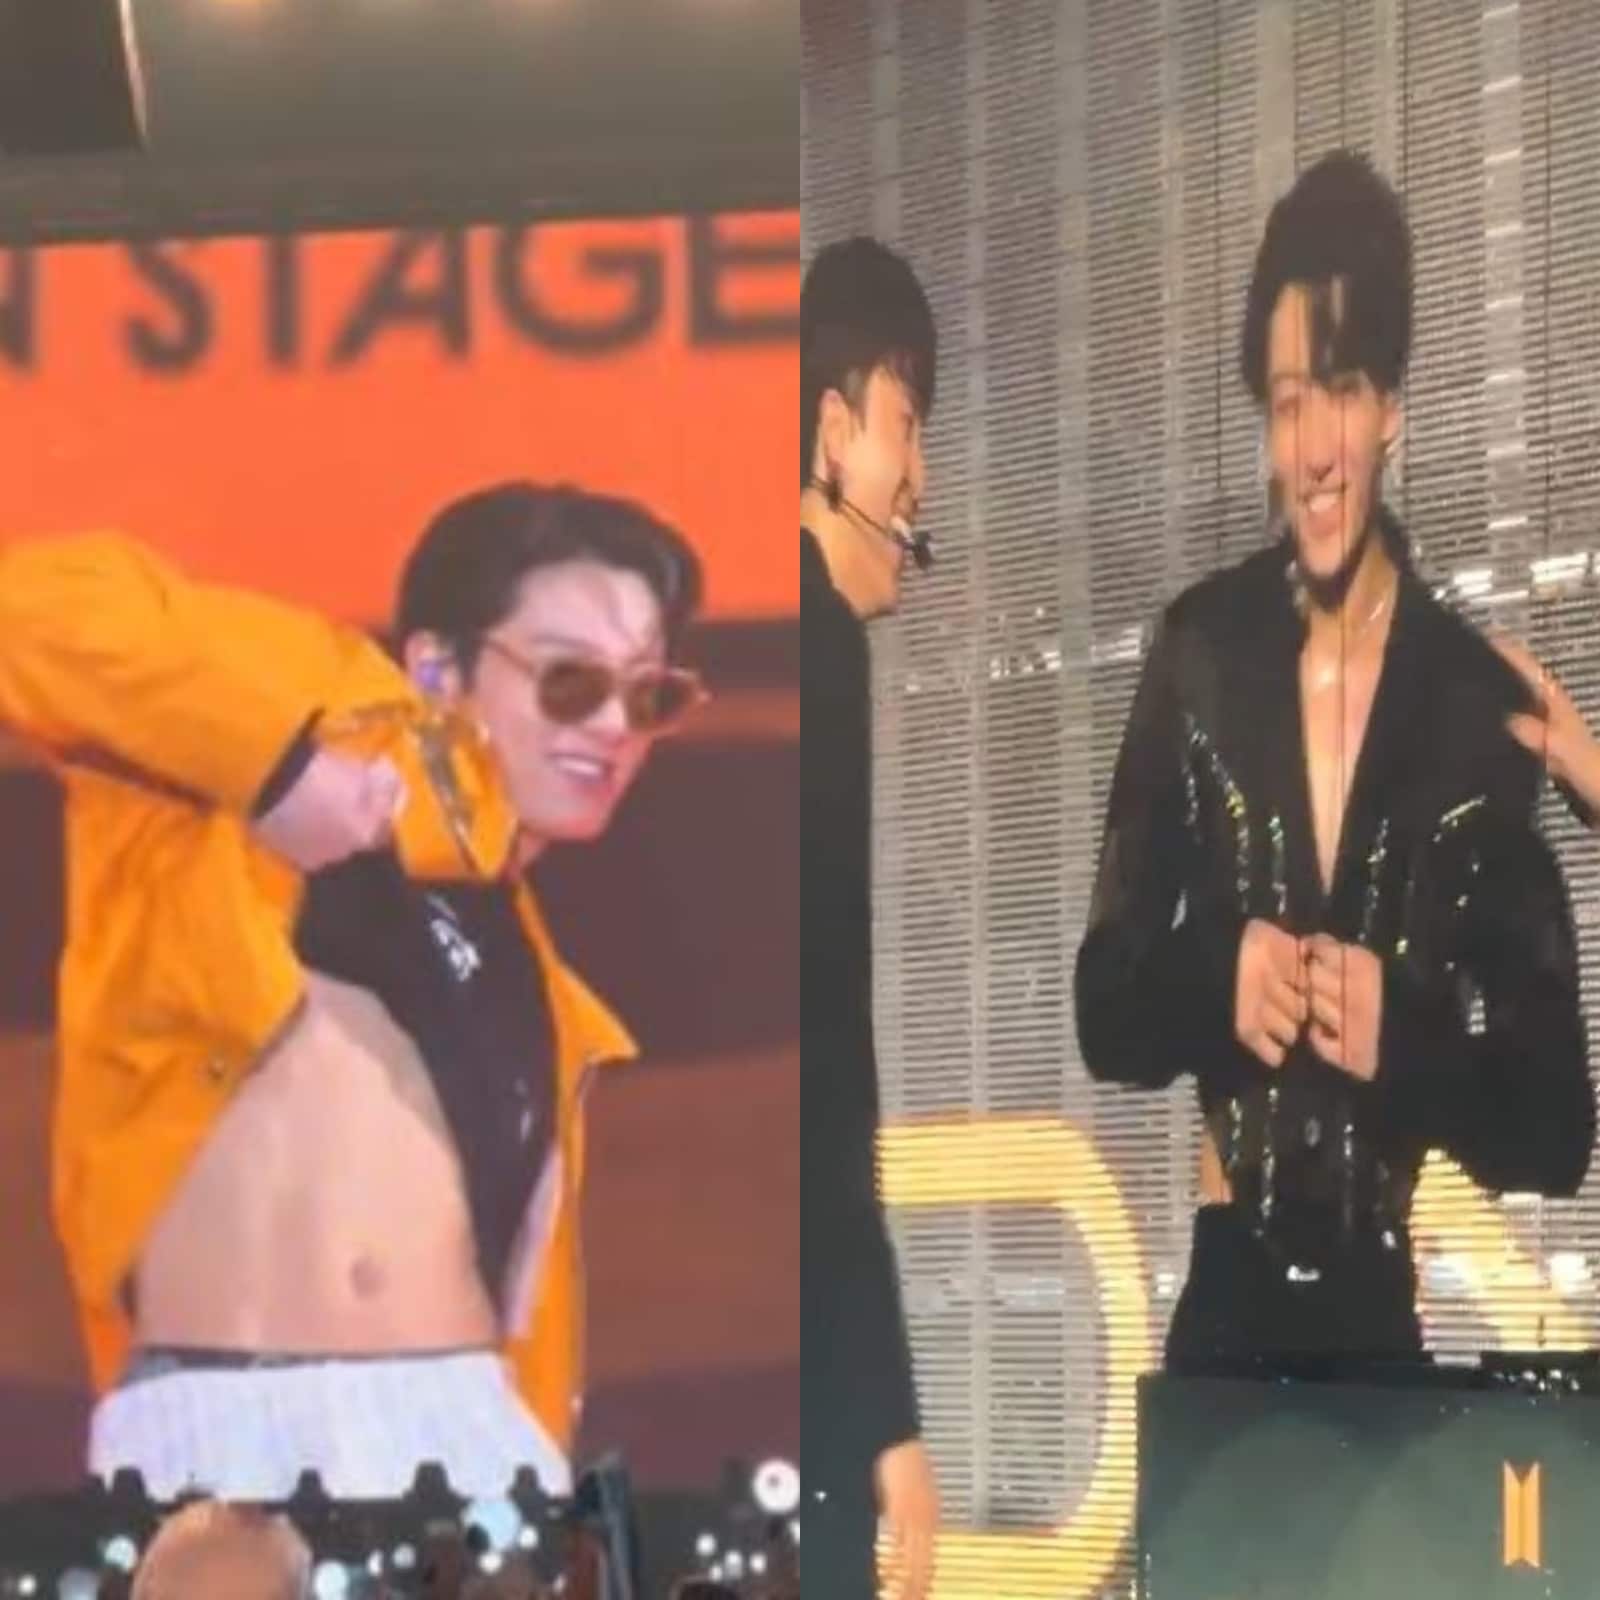 BTS' PTD Las Vegas Concert: Jungkook flashing abs to RM addressing Grammys,  check out ICONIC moments